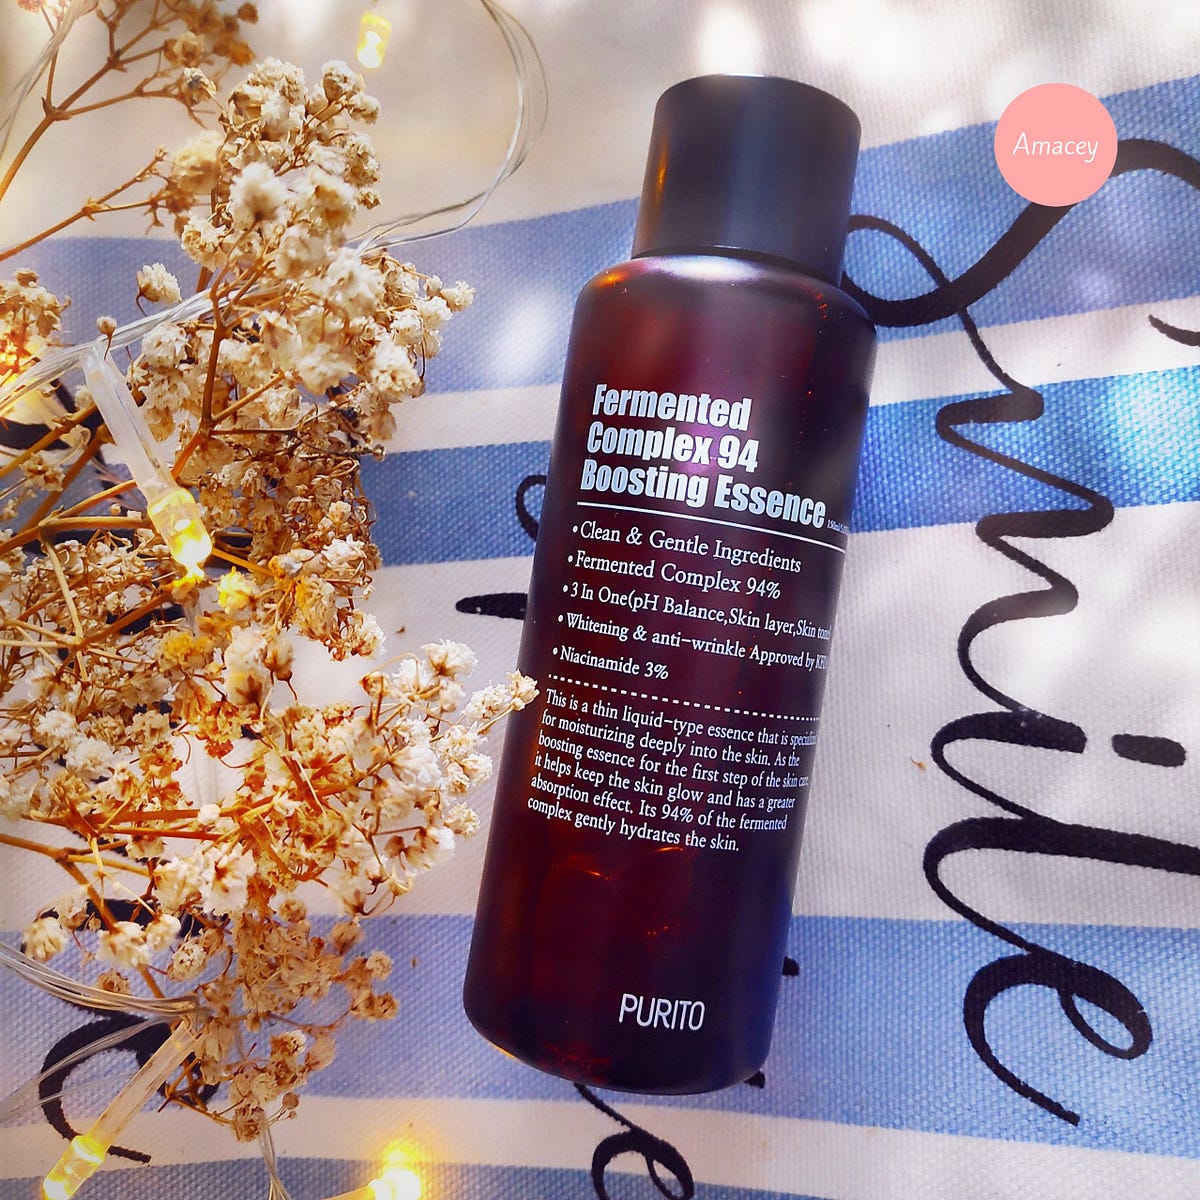 Essence PURITO Fermented Complex 94 Boosting [Review]